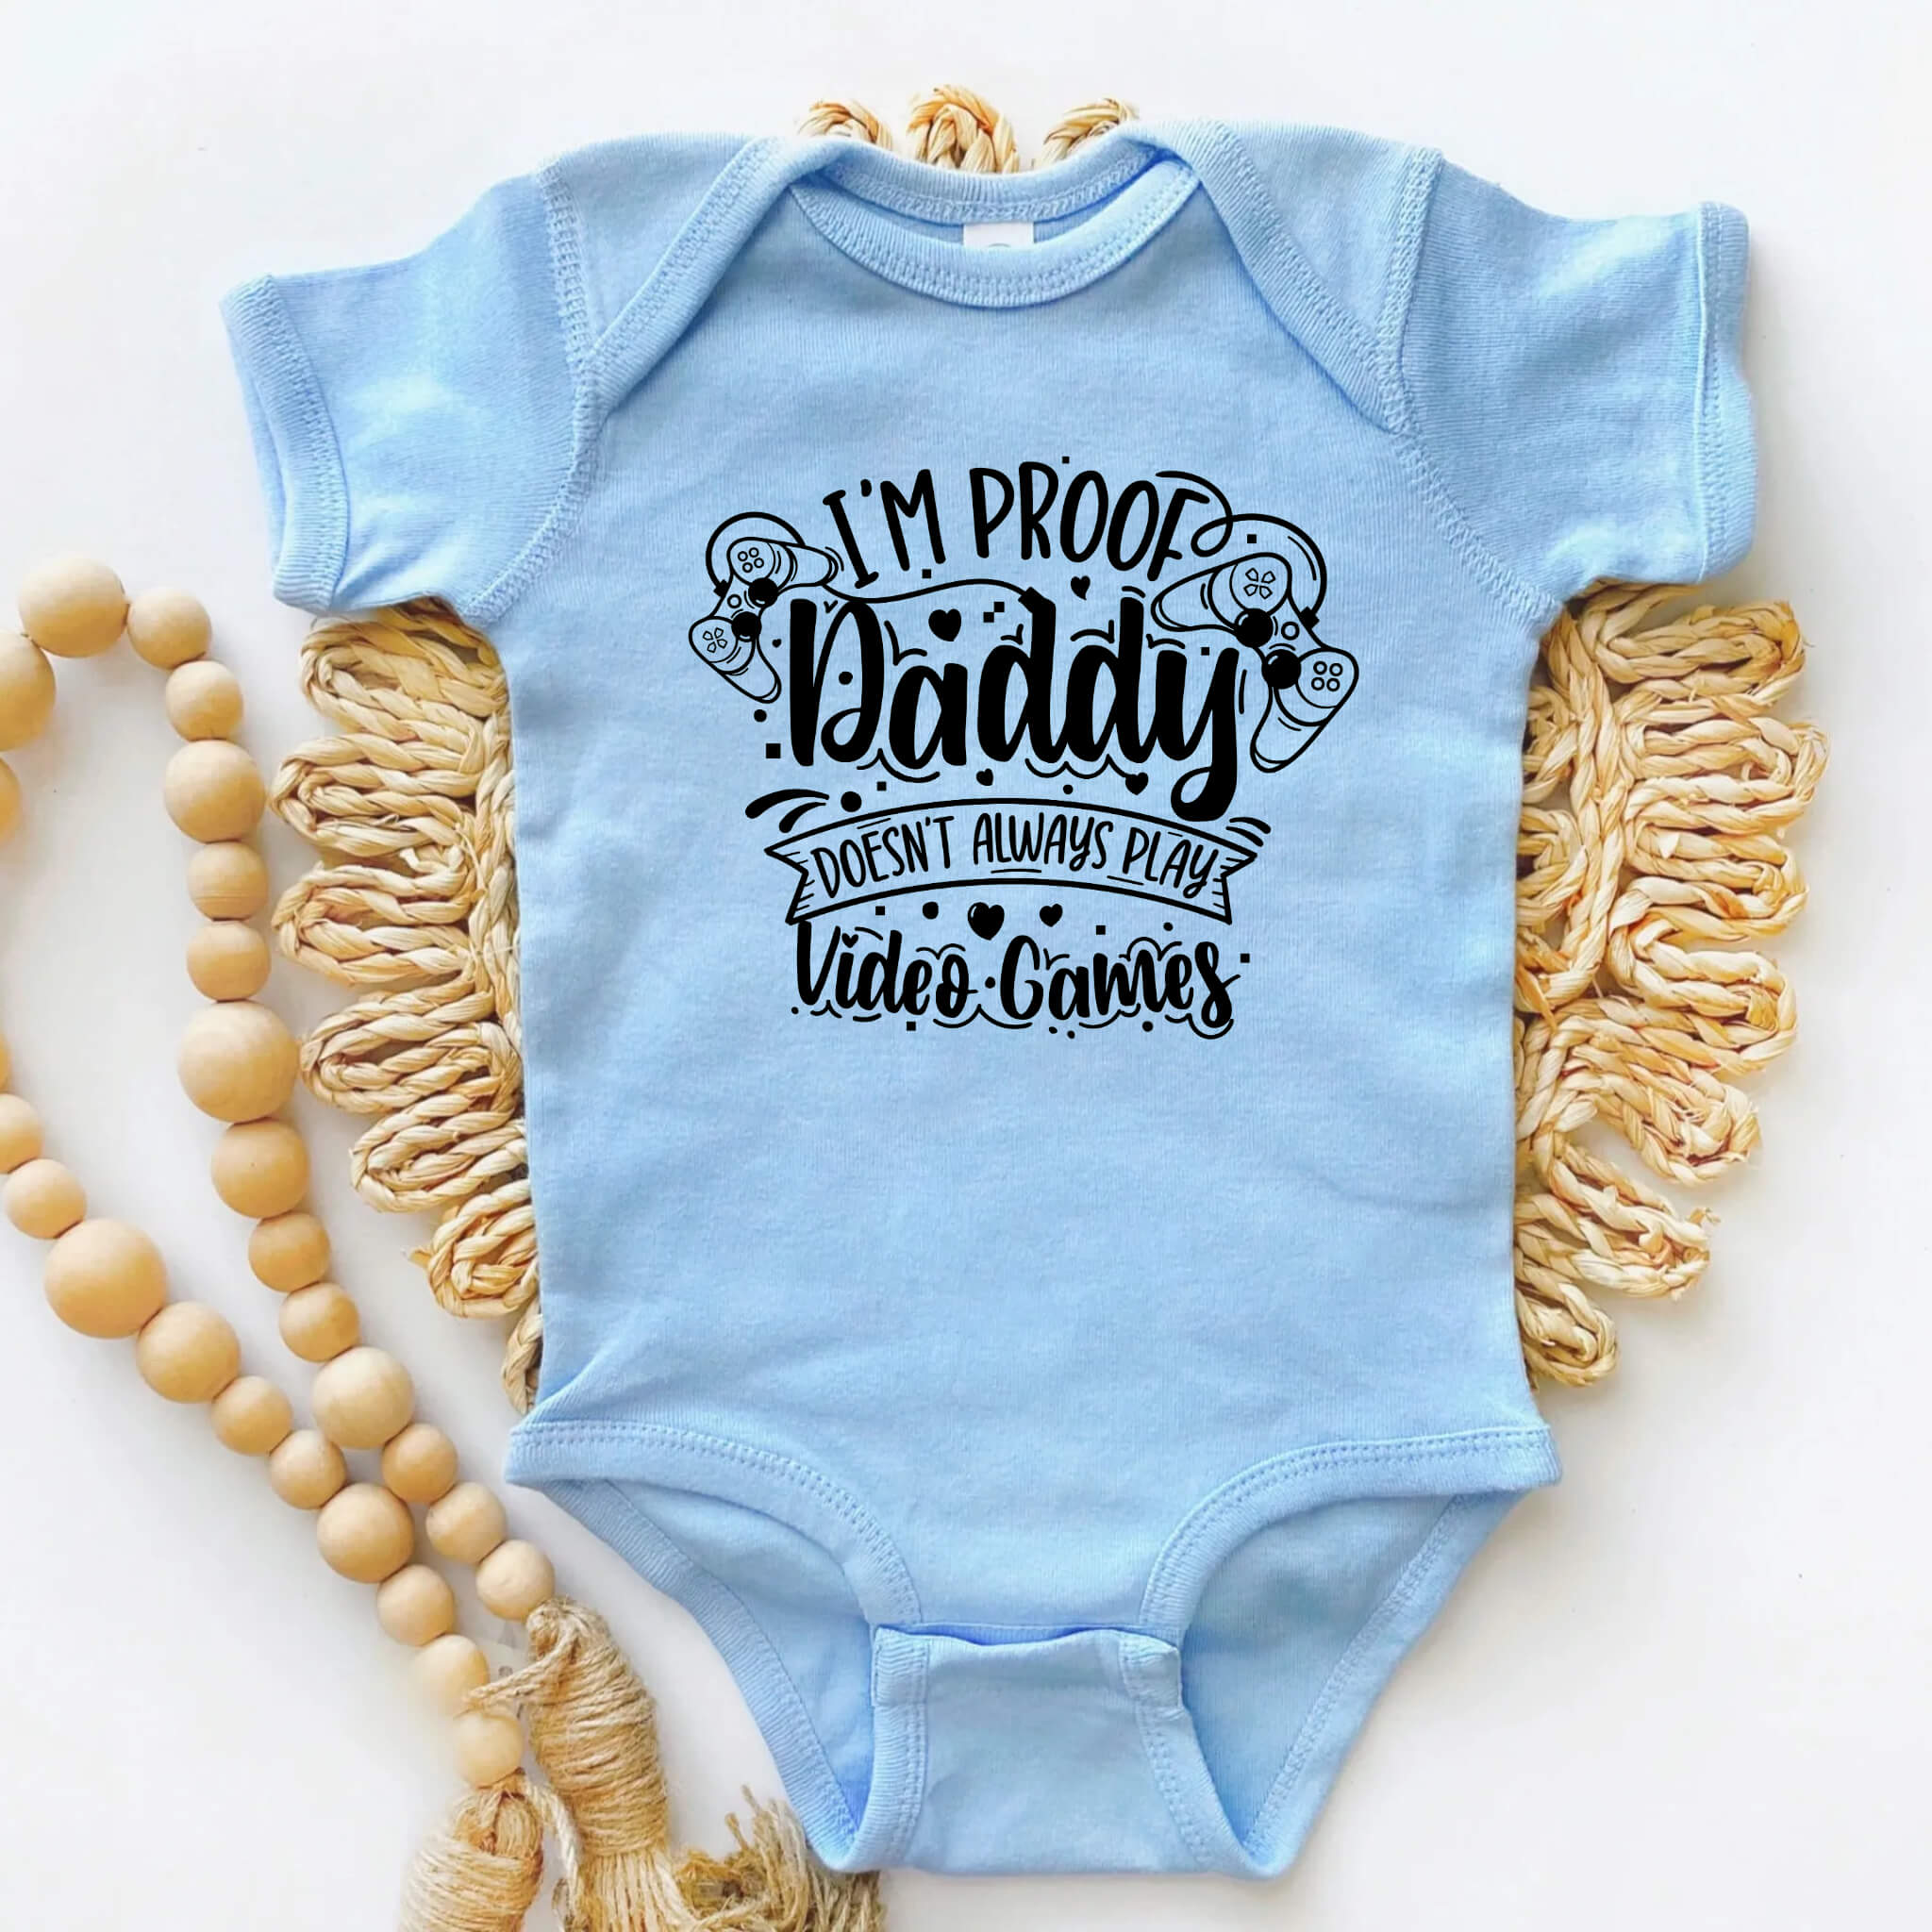 New Baby Onesie, I’m Proof Daddy Doesn’t Always Play Video Games Baby Bodysuit, Boy’s, Girl’s Baby Shower Gift, New Baby Take Home Outfit, Maternity Photo Prop Onesie, Video Gamer Baby Onesie Outfit